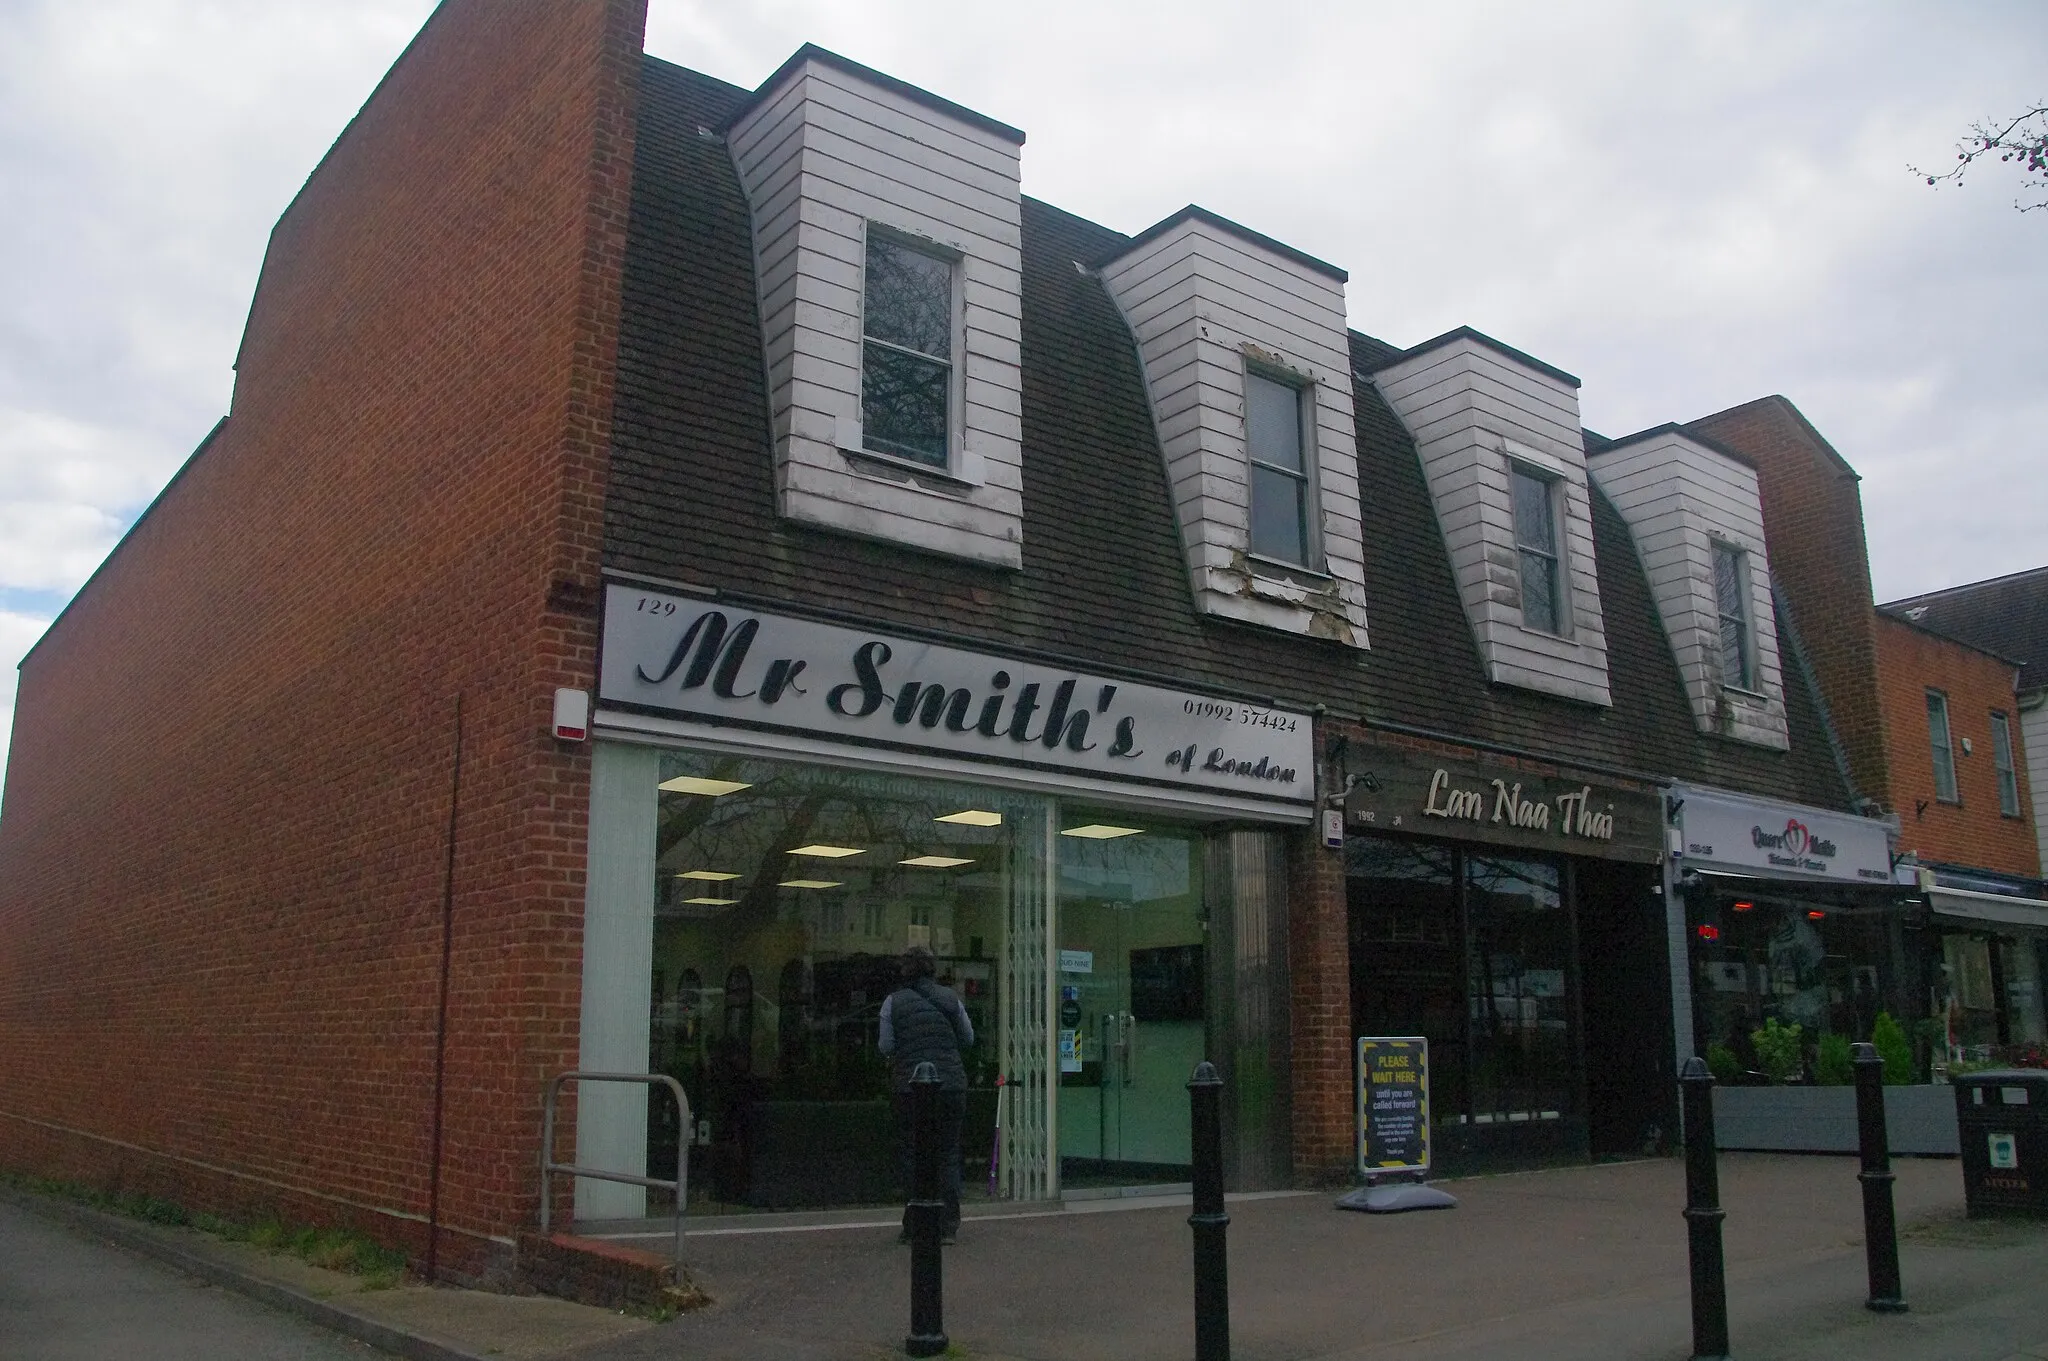 Photo showing: Shops on Epping High Street (2), Essex - April 2021 - showing Mr Smith's hairdresssers and Lan Nan Thai Restaurant